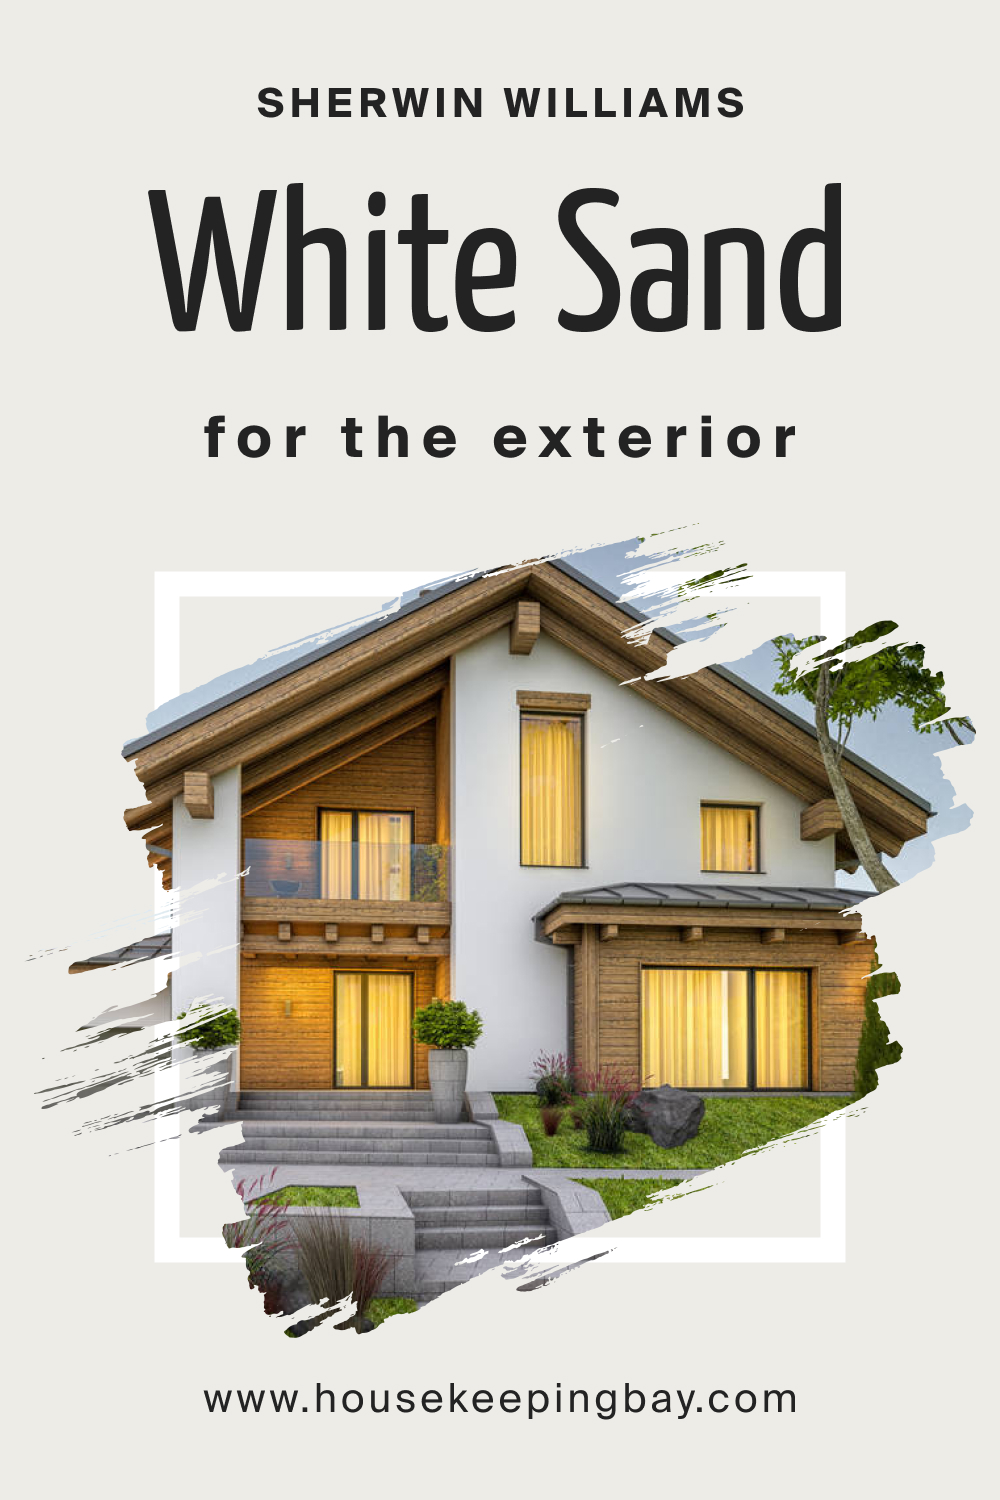 Sherwin Williams. White Sand SW 9582 For the exterior